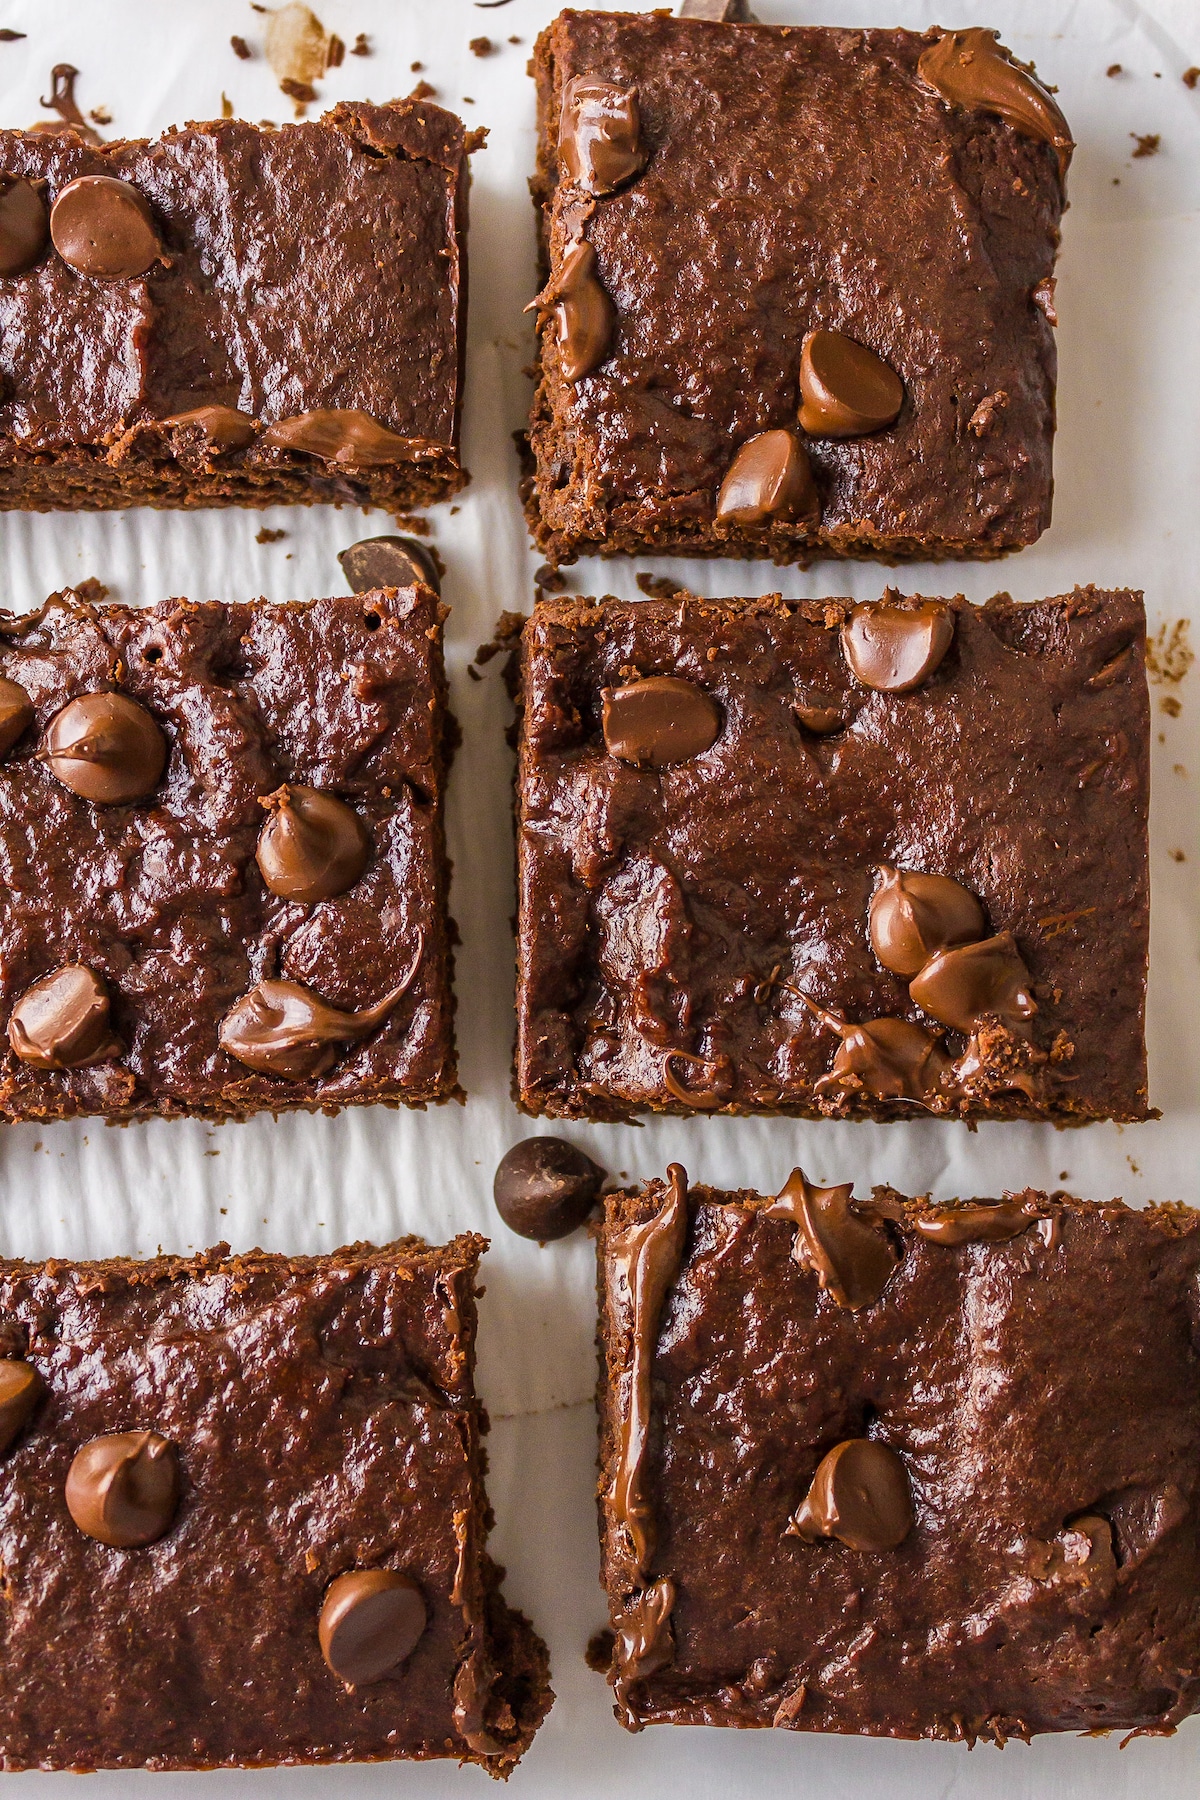 baked dairy-free brownies on parchment paper.